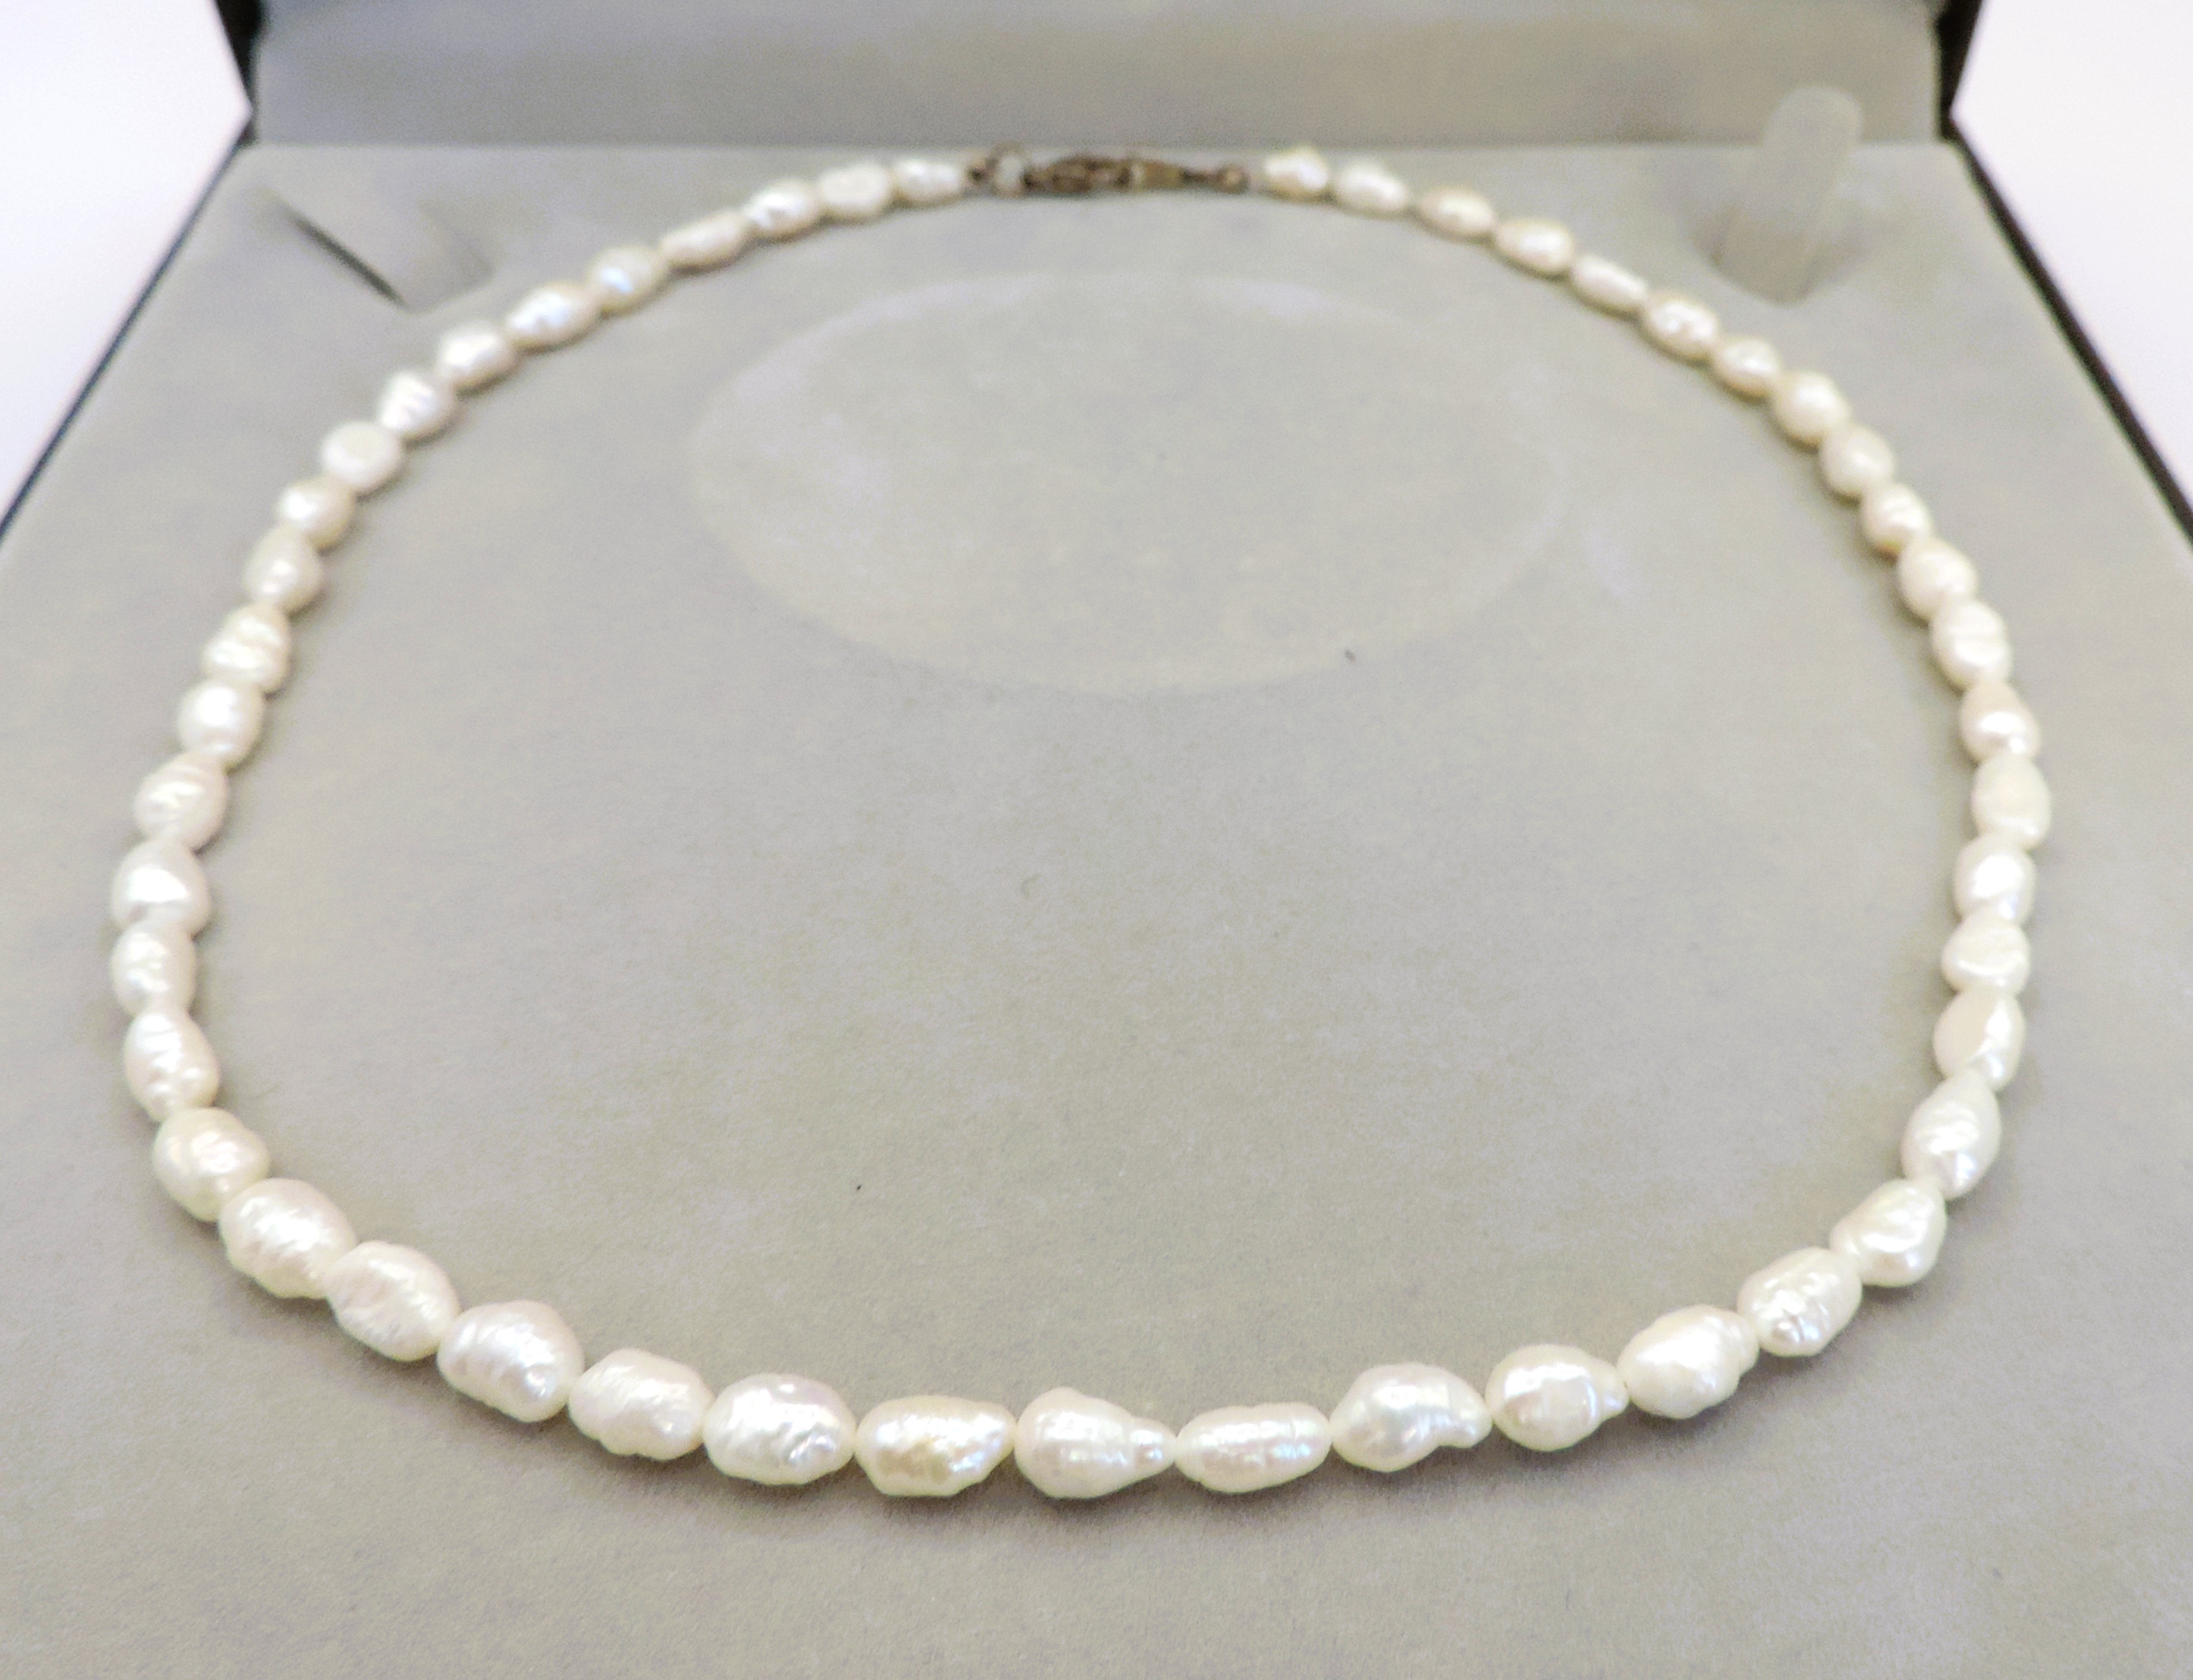 Cultured Rice Pearl Necklace Silver Clasp With Gift Pouch - Image 3 of 3